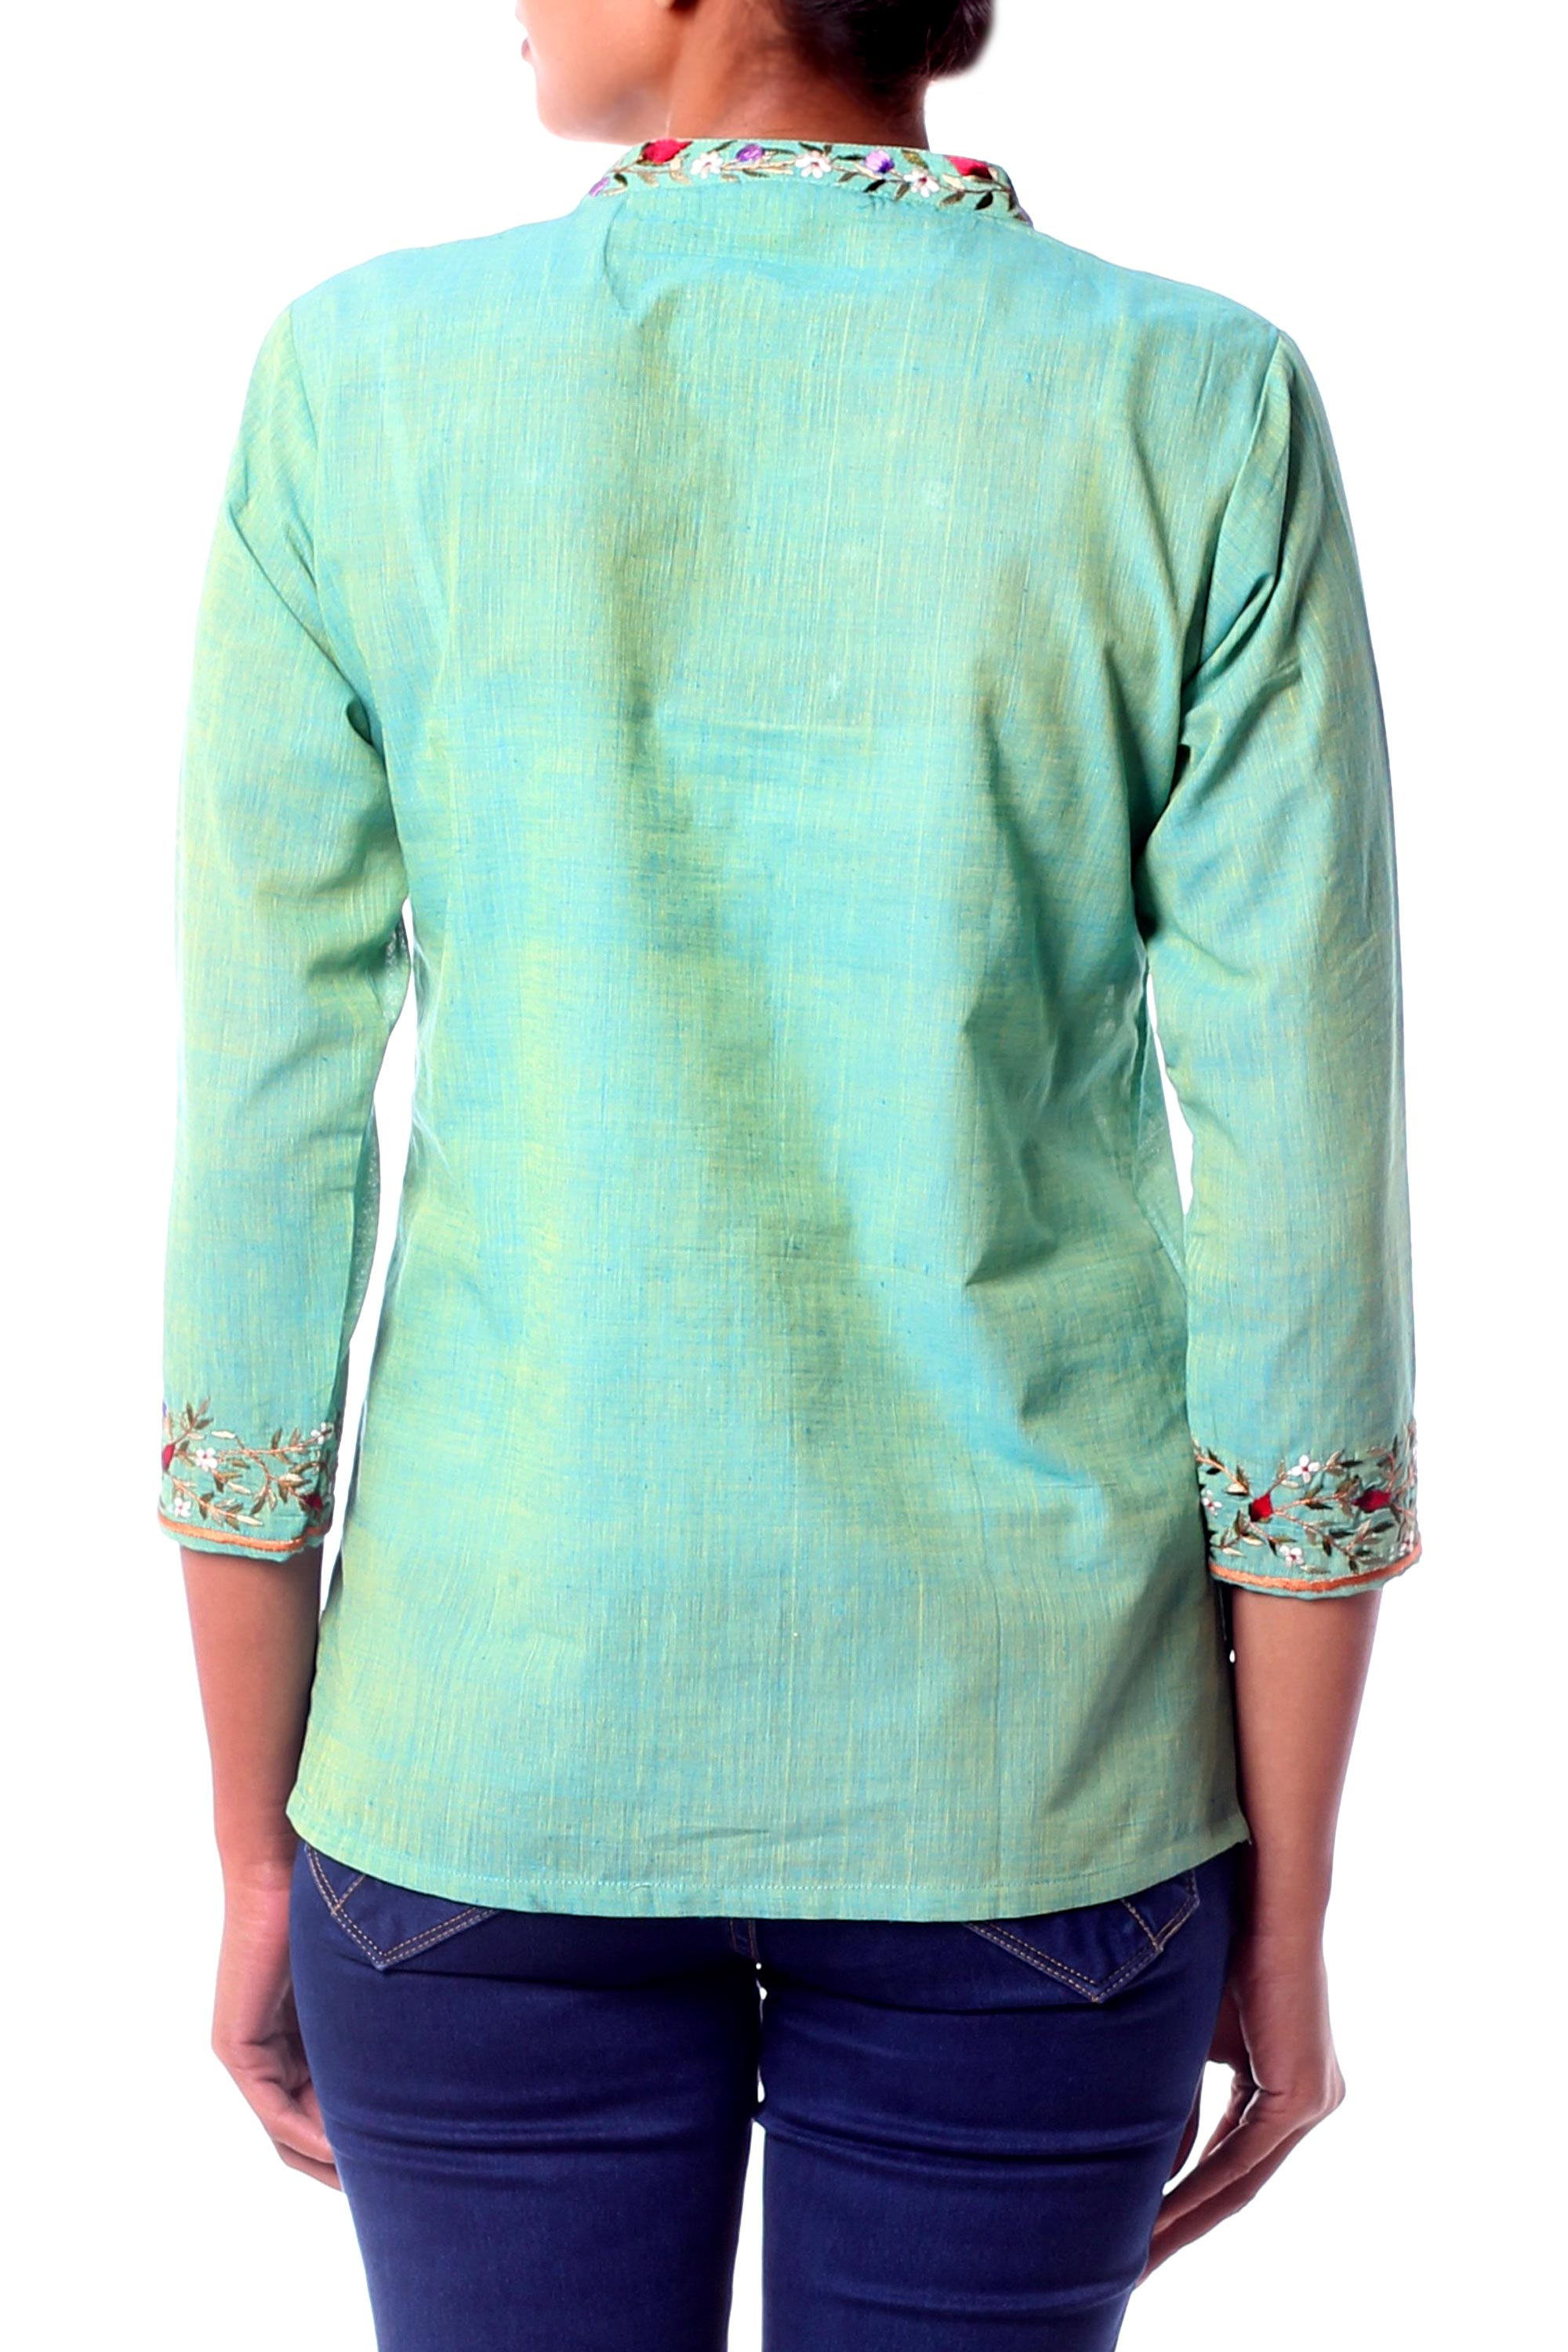 UNICEF Market | Artisan Crafted Floral Cotton Solid Tunic Top - Cool Garden